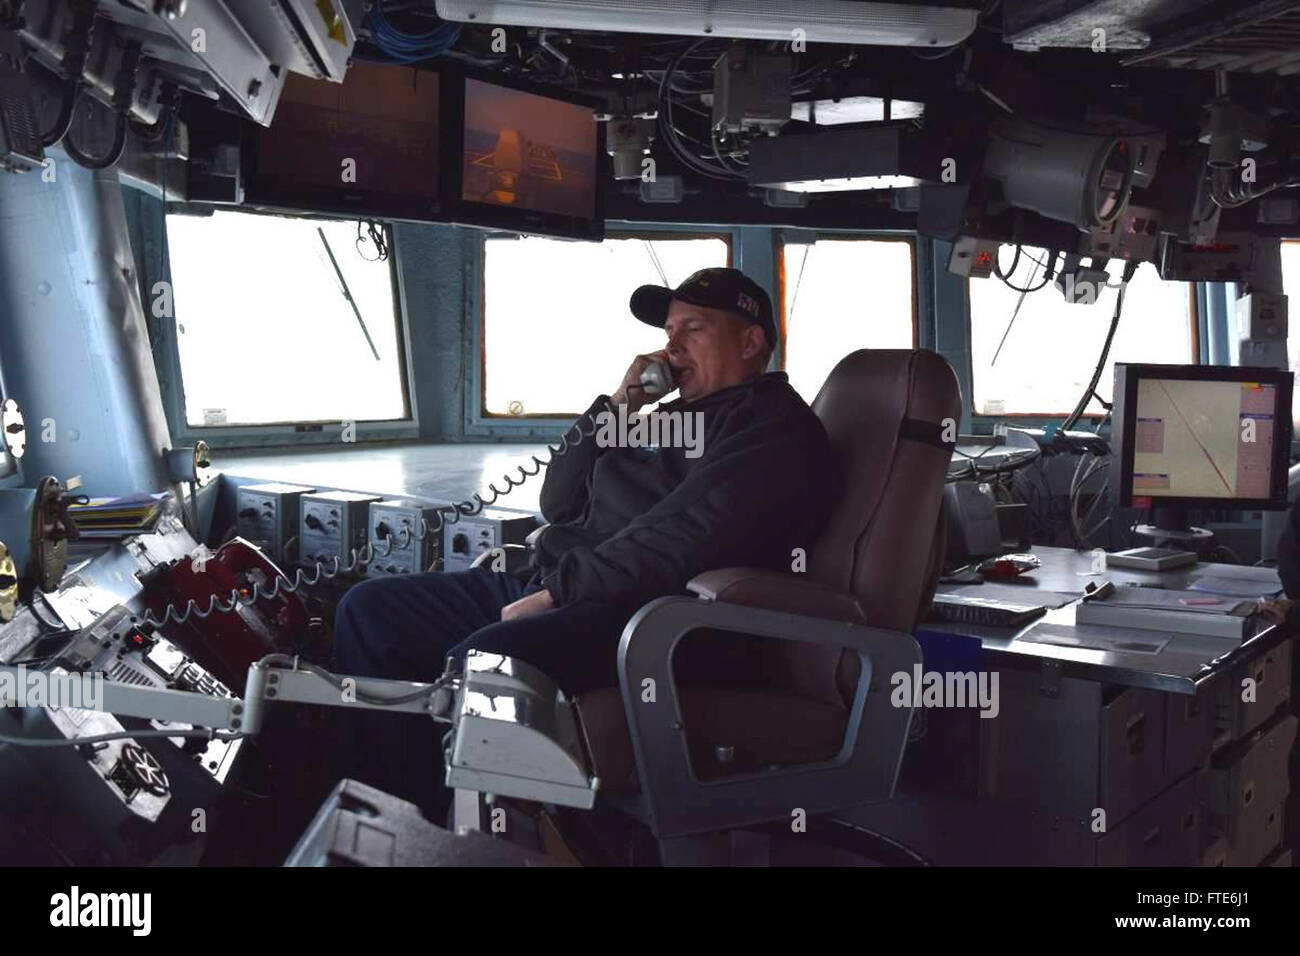 151112-N-ZZ999005 ATLANTIC OCEAN (Nov. 12, 2015) USS Carney (DDG 64) Commanding Officer, Cmdr. Ken Pickard, from Pensacola, Florida, receives tactical updates via a bridge phone Nov. 12, 2015. Carney, an Arleigh Burke-class guided-missile destroyer, forward deployed to Rota, Spain is conducting a routine patrol in the U.S. 6th Fleet area of operations in support of U.S. national security interests in Europe. (U.S. Navy photo by Lt. j.g. Eva LaFiura/ Released) Stock Photo